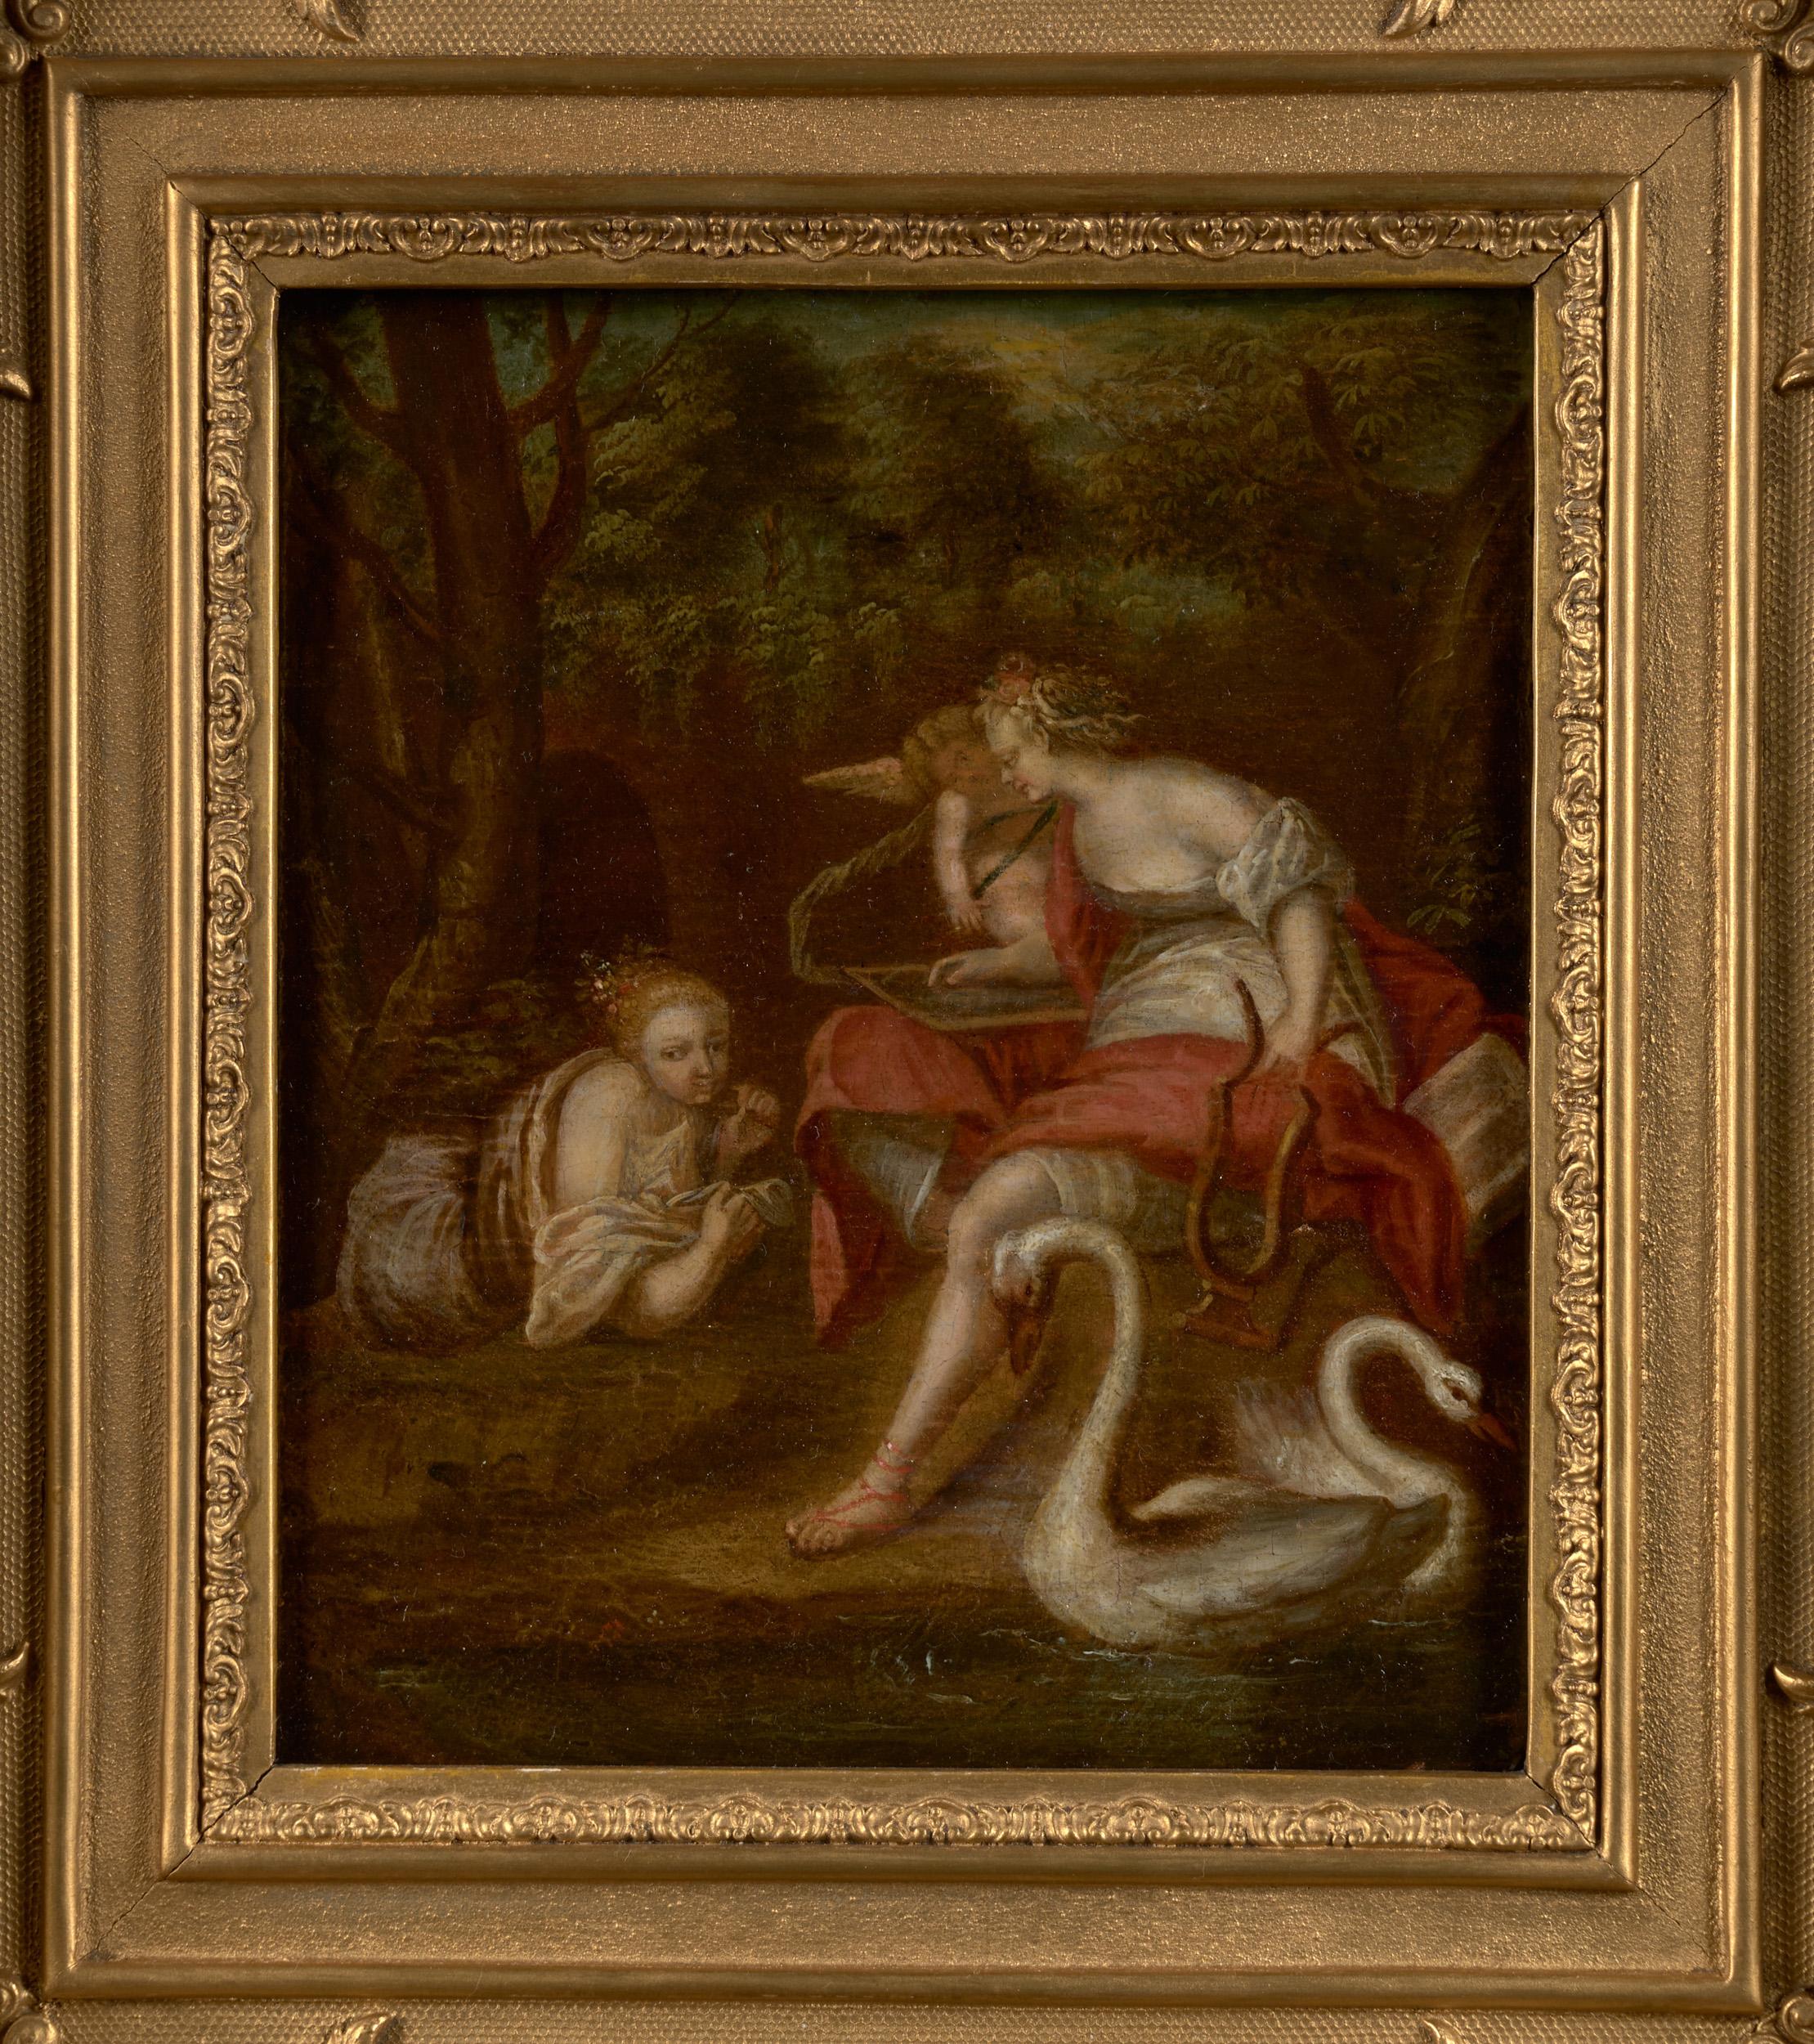 Unknown Portrait Painting - 18th C, Baroque style, Mythology, Muses Erato and Euterpe with Amor and Swans